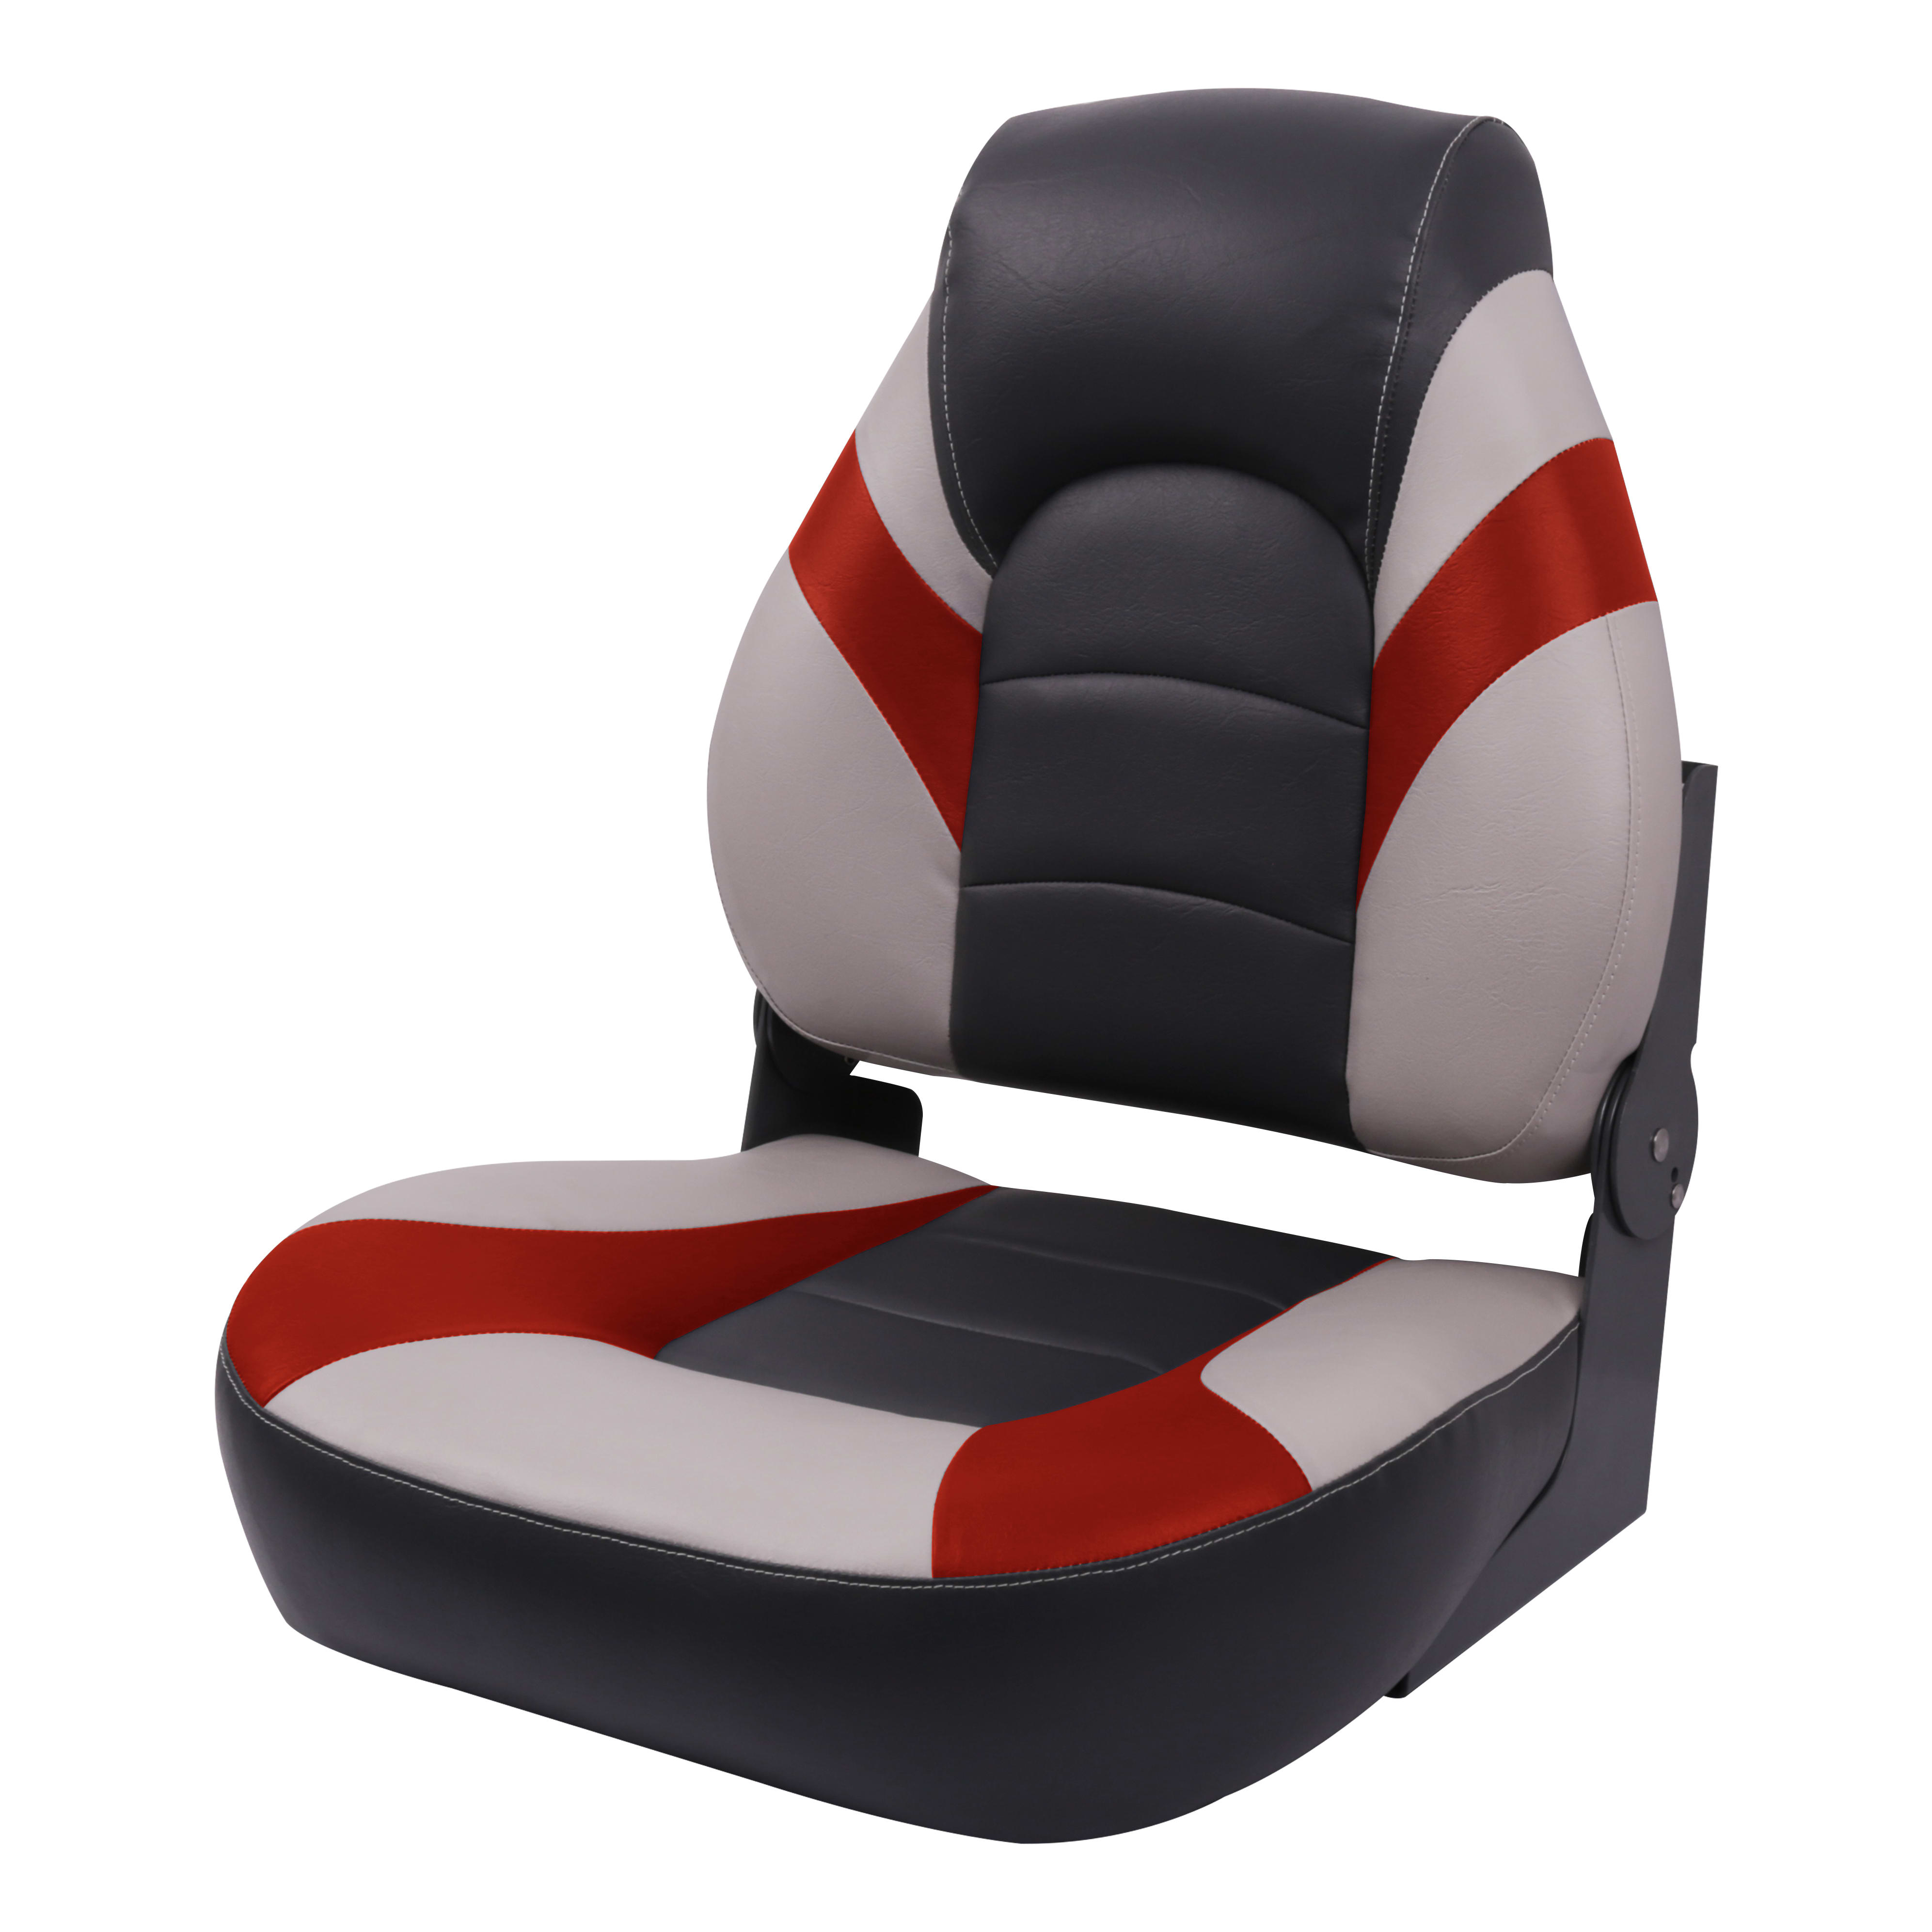 Bass Pro Shops® Extreme Boat Seat - Grey/Red